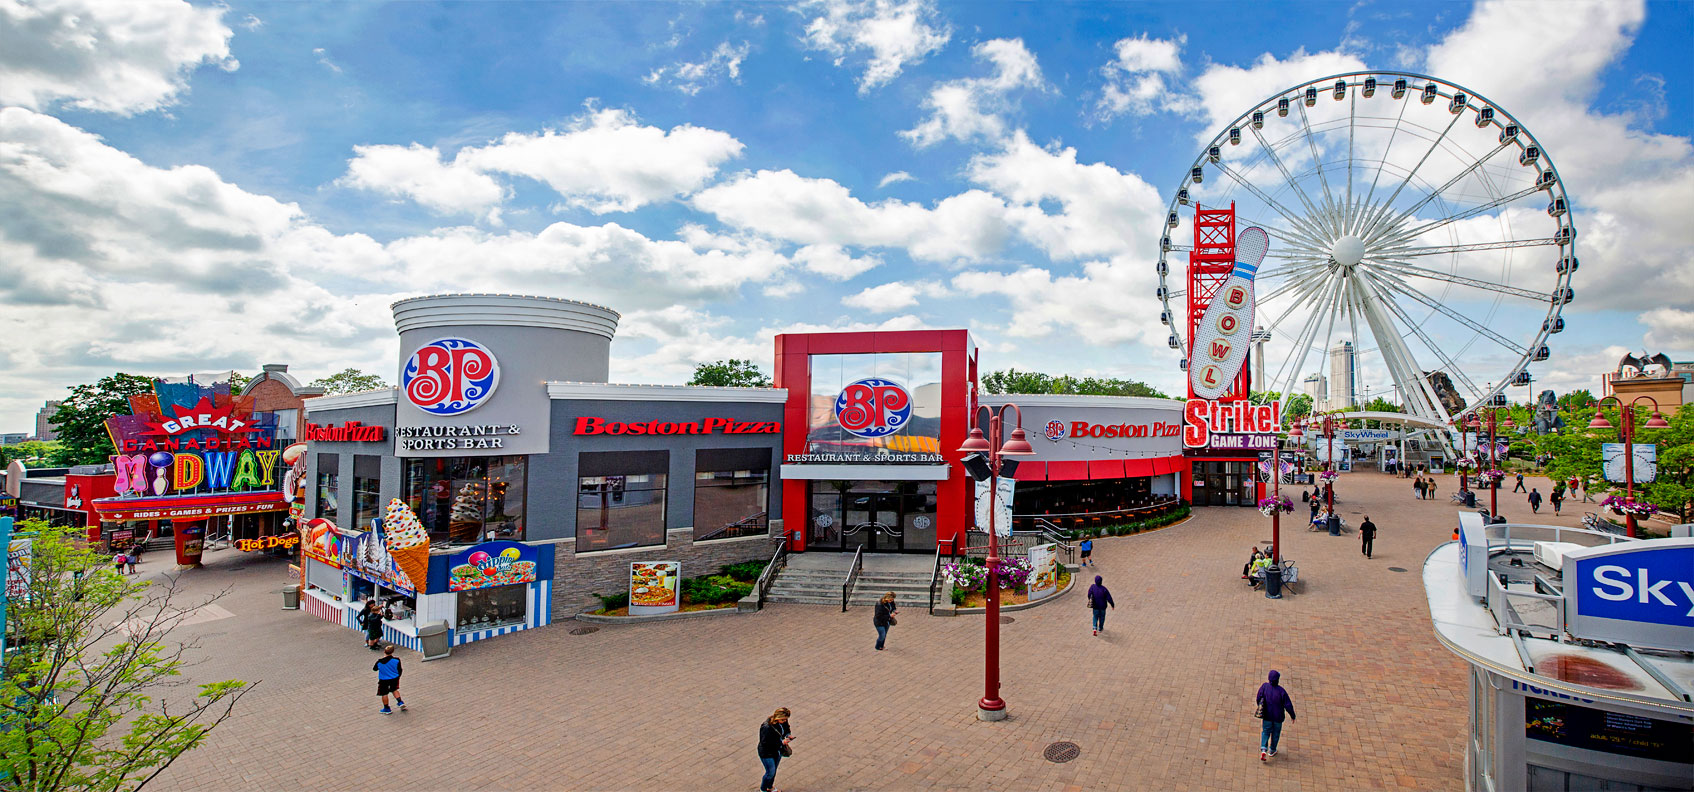 Boston Pizza Clifton Hill Exterior Early Afternoon Courtyard